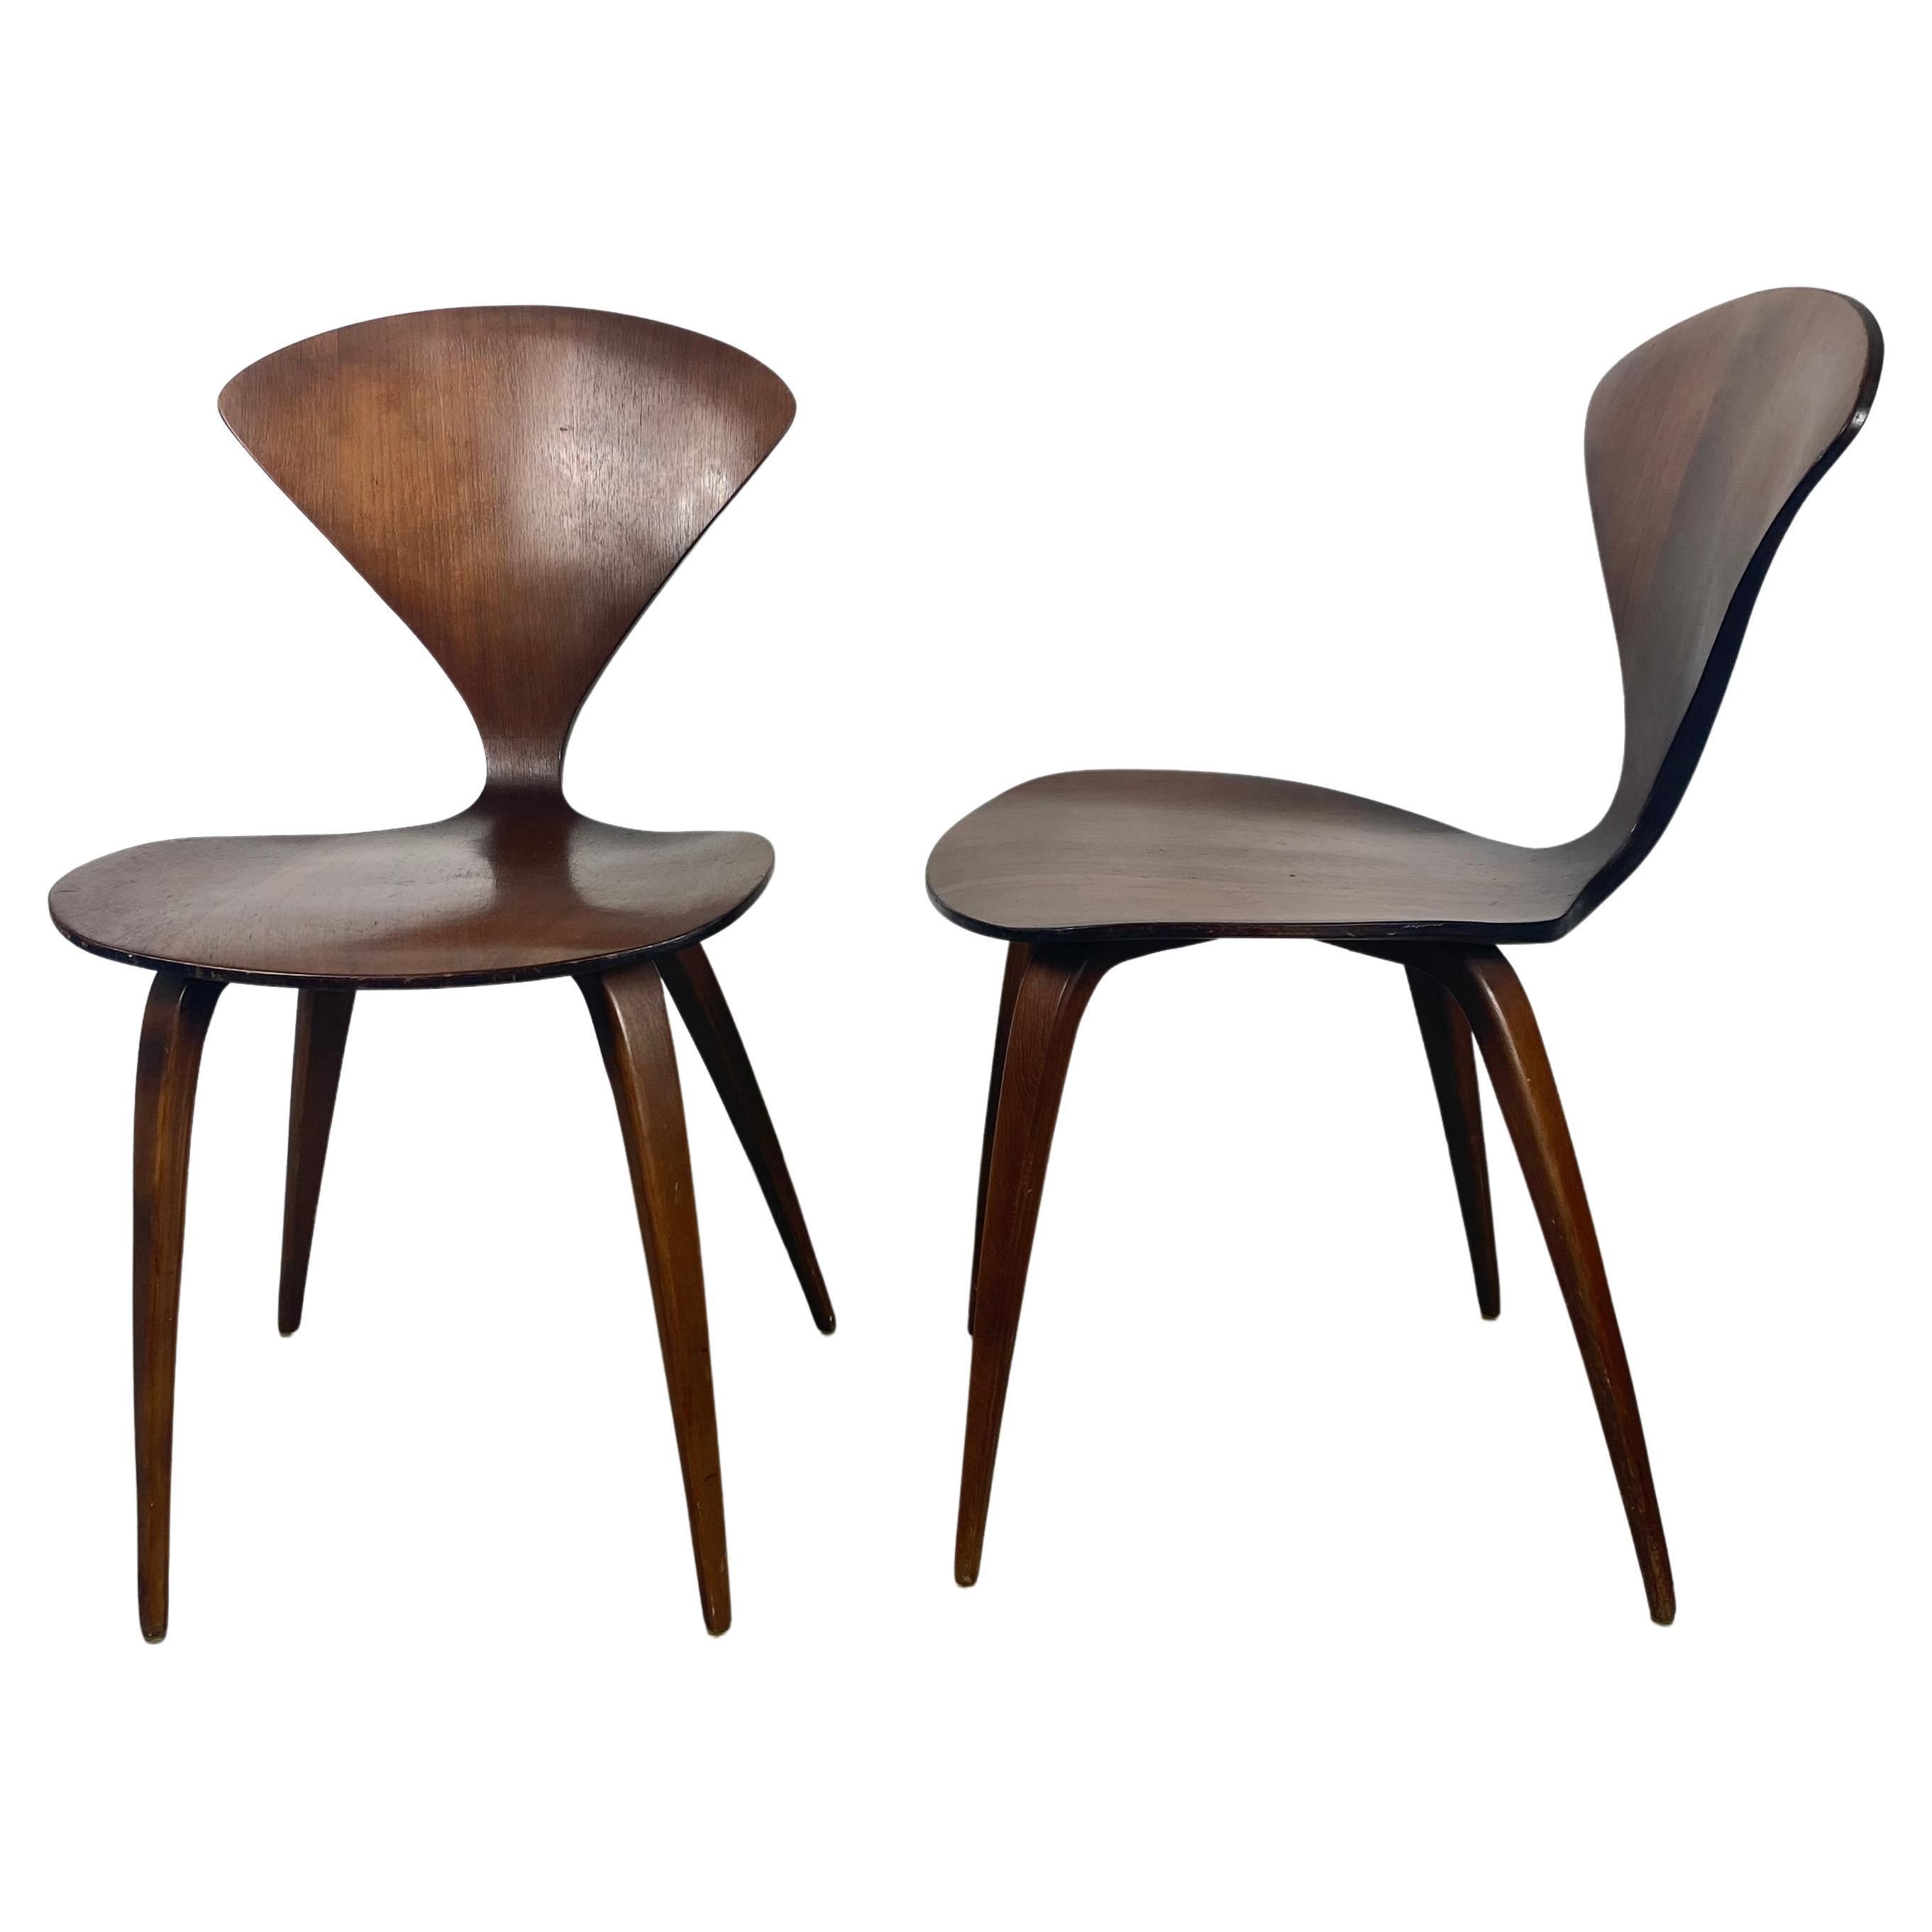 Classic Pair Modernist Plywood Side Chairs by Norman Cherner for Plycraft